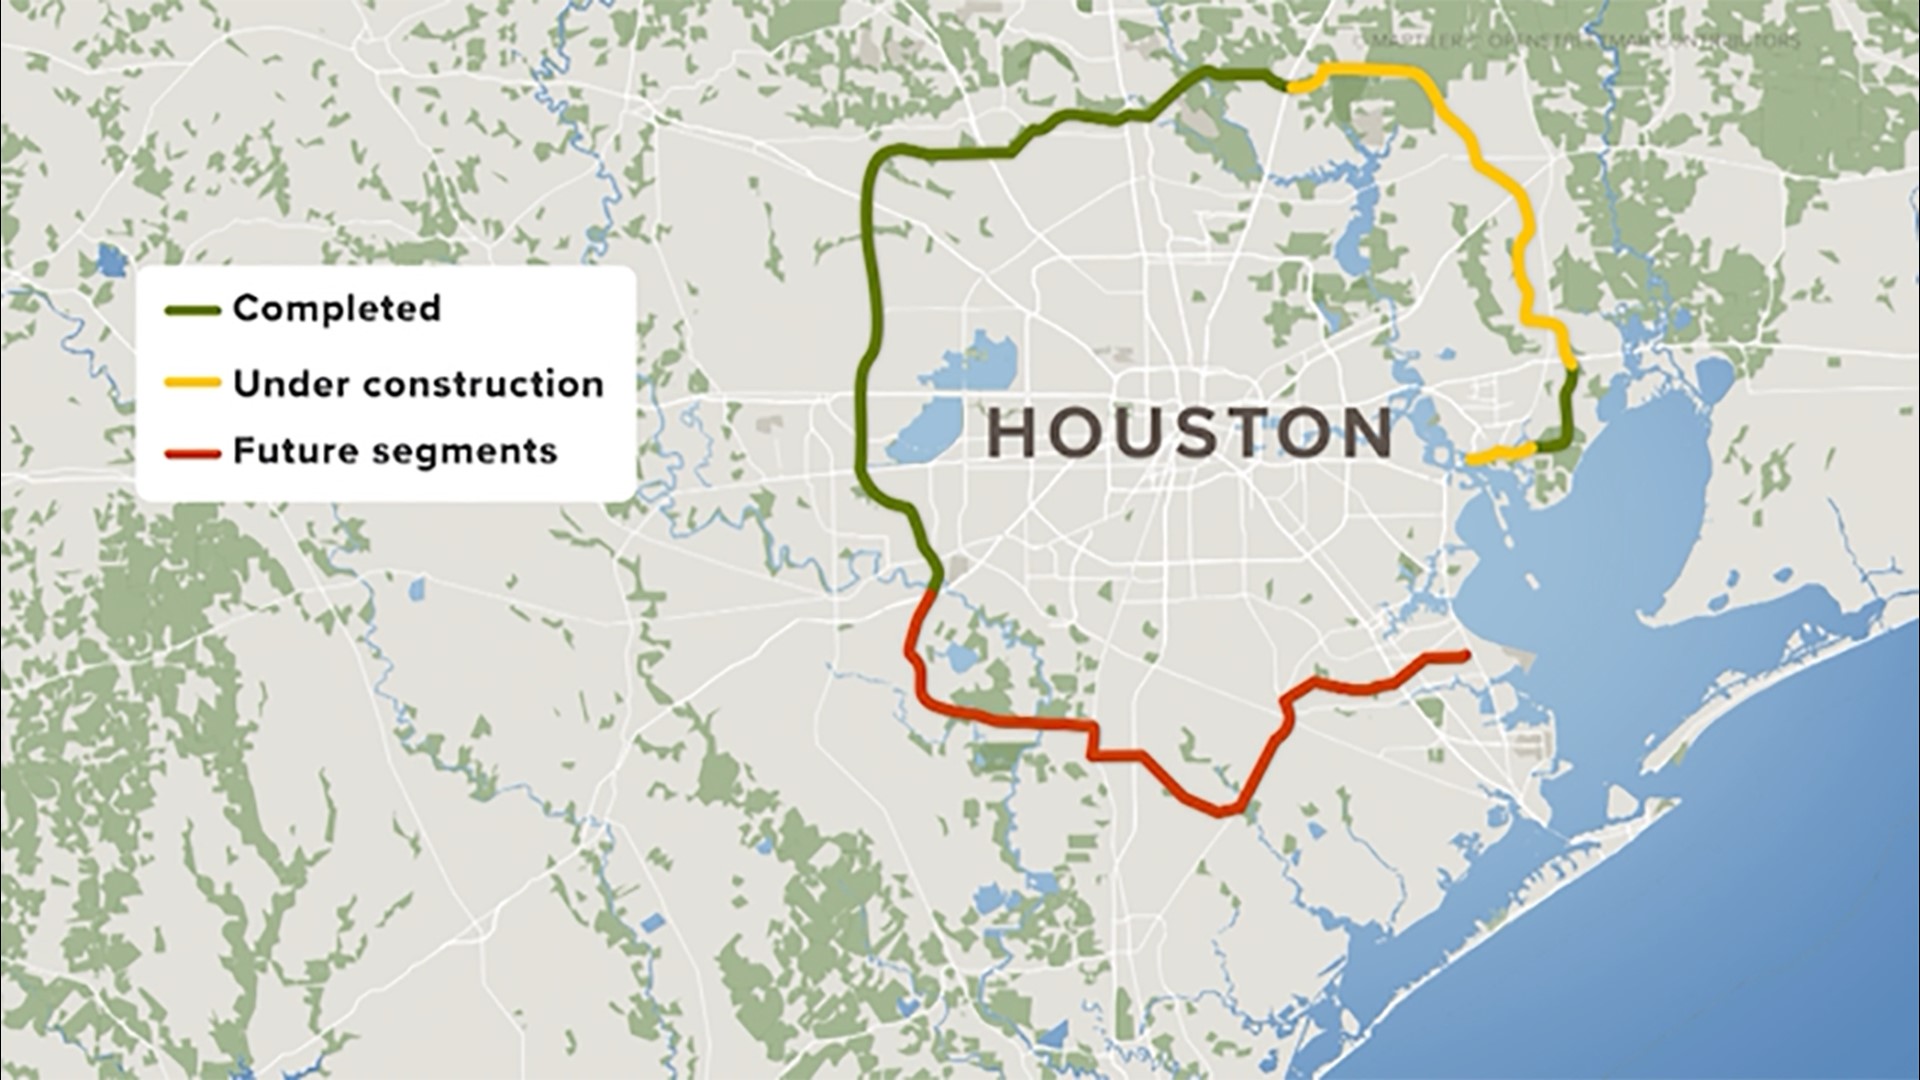 The newest segment runs from the Eastex Freeway in New Caney to Highway 146 in Baytown.